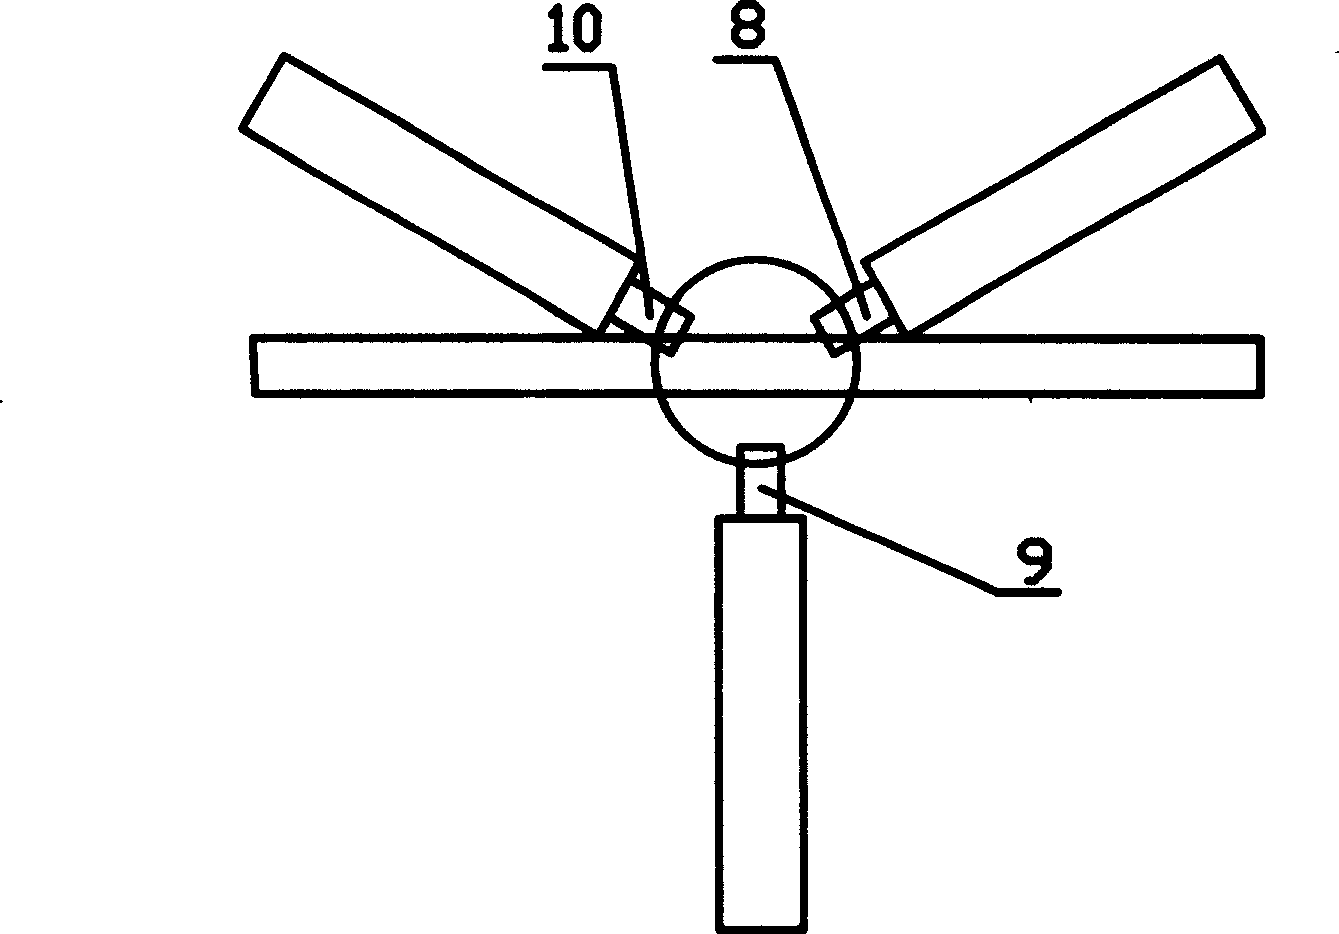 Tail rudder operated rotor flying robot